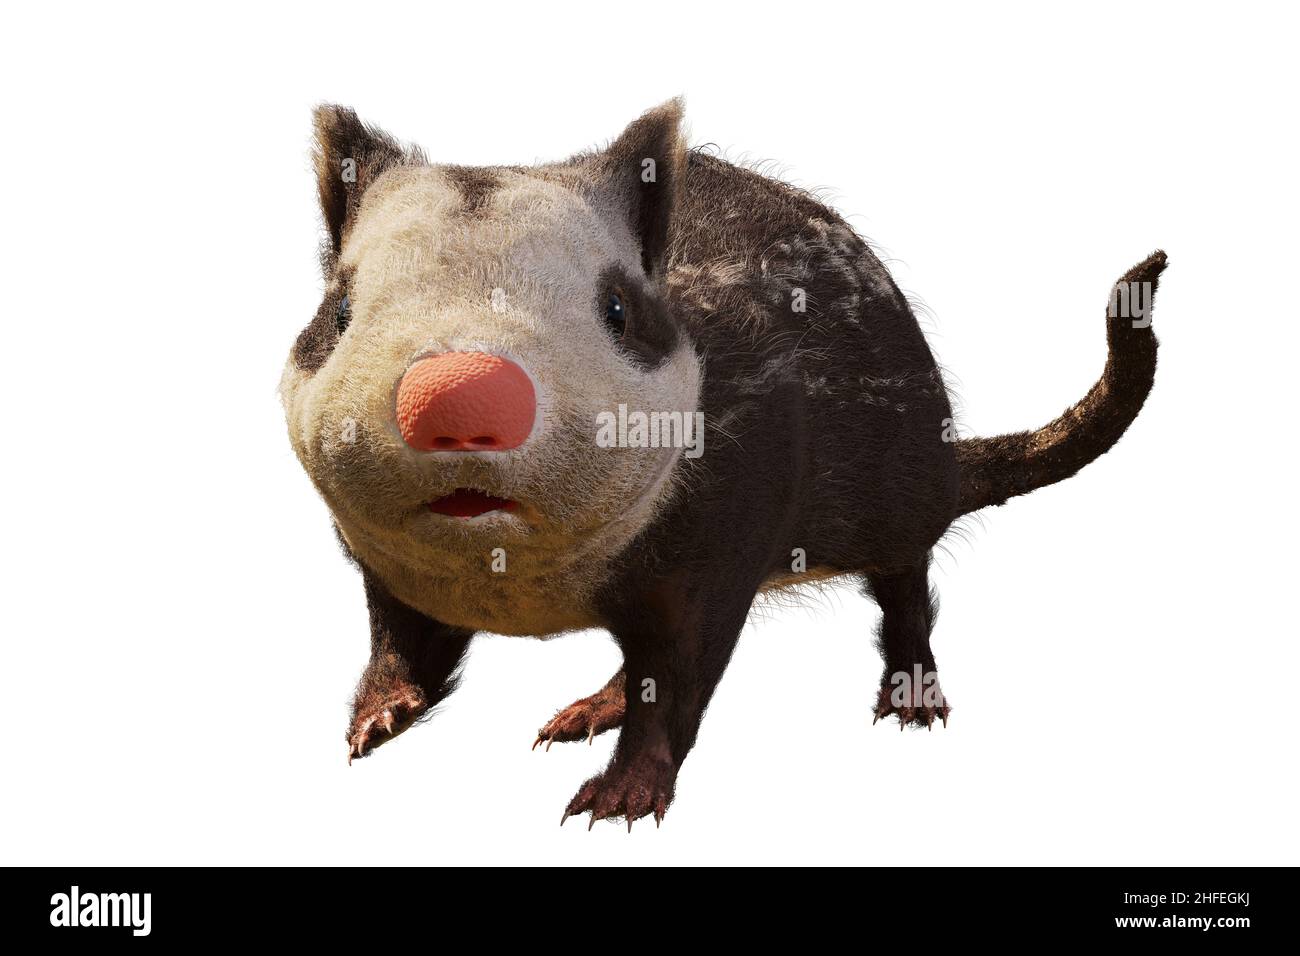 Alphadon, small extinct mammal from the Late Cretaceous that lived alongside dinosaurs, isolated on white background Stock Photo